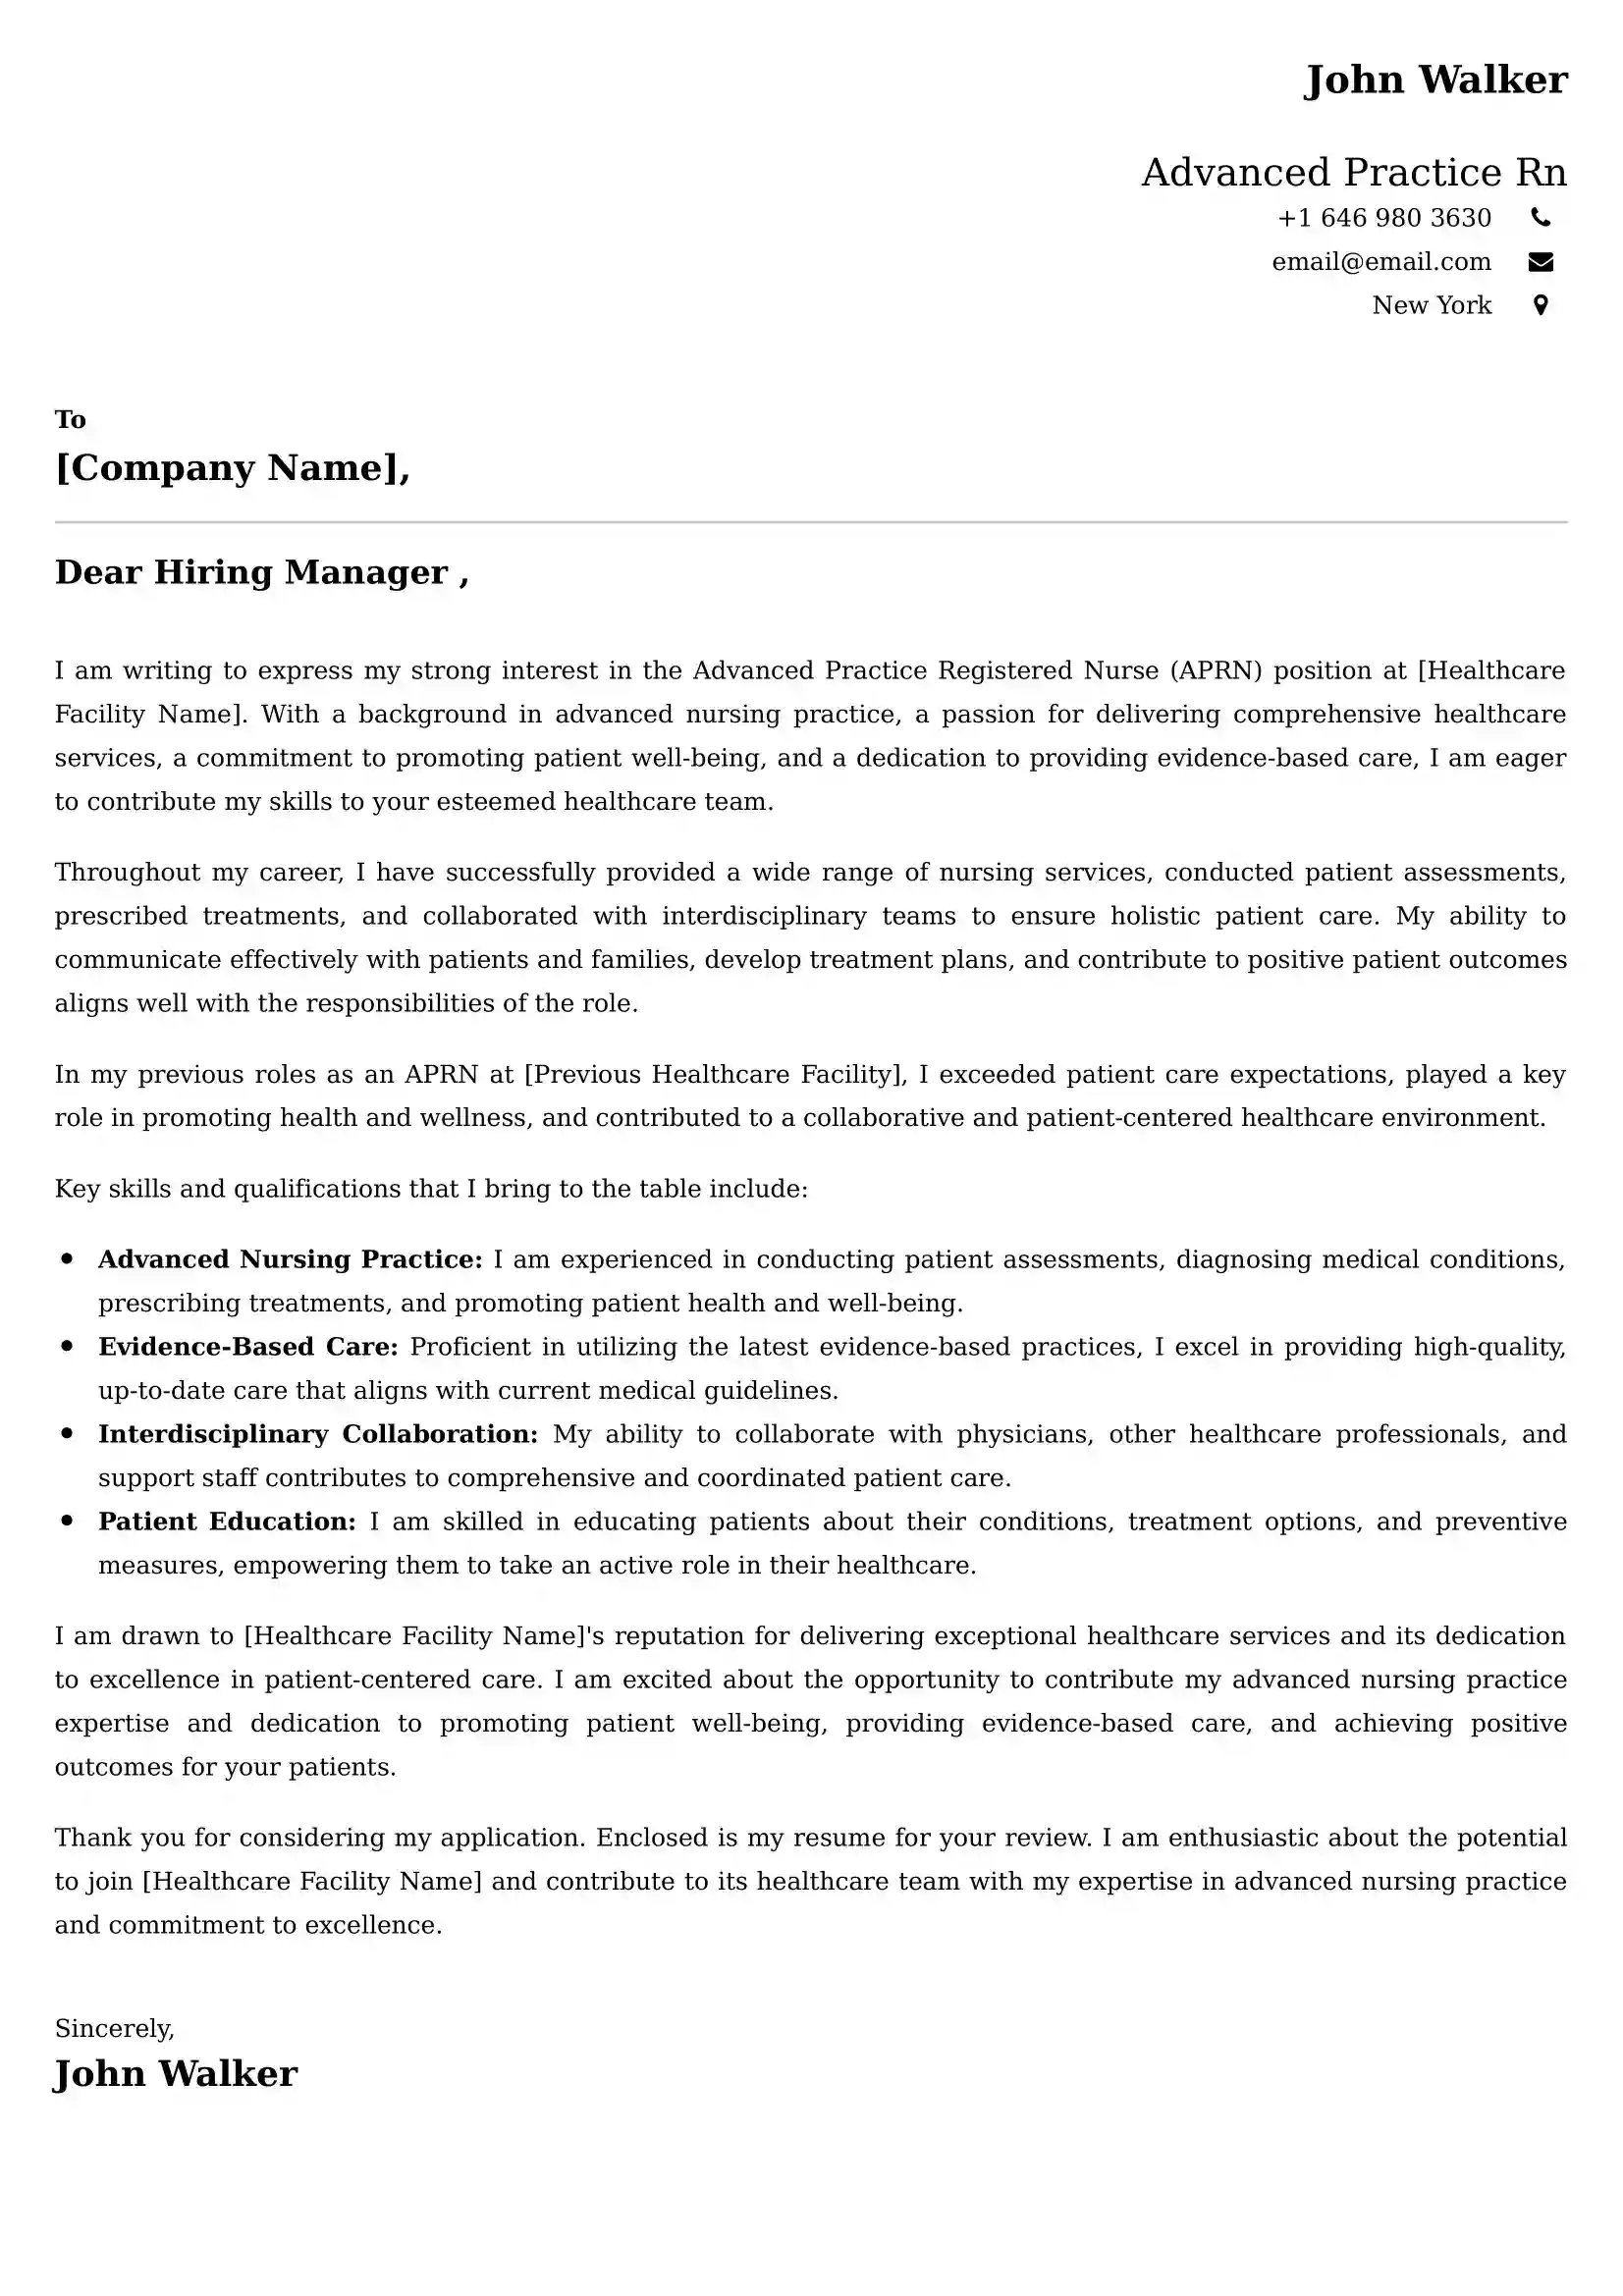 Advanced Practice Rn Cover Letter Examples - US Format and Tips